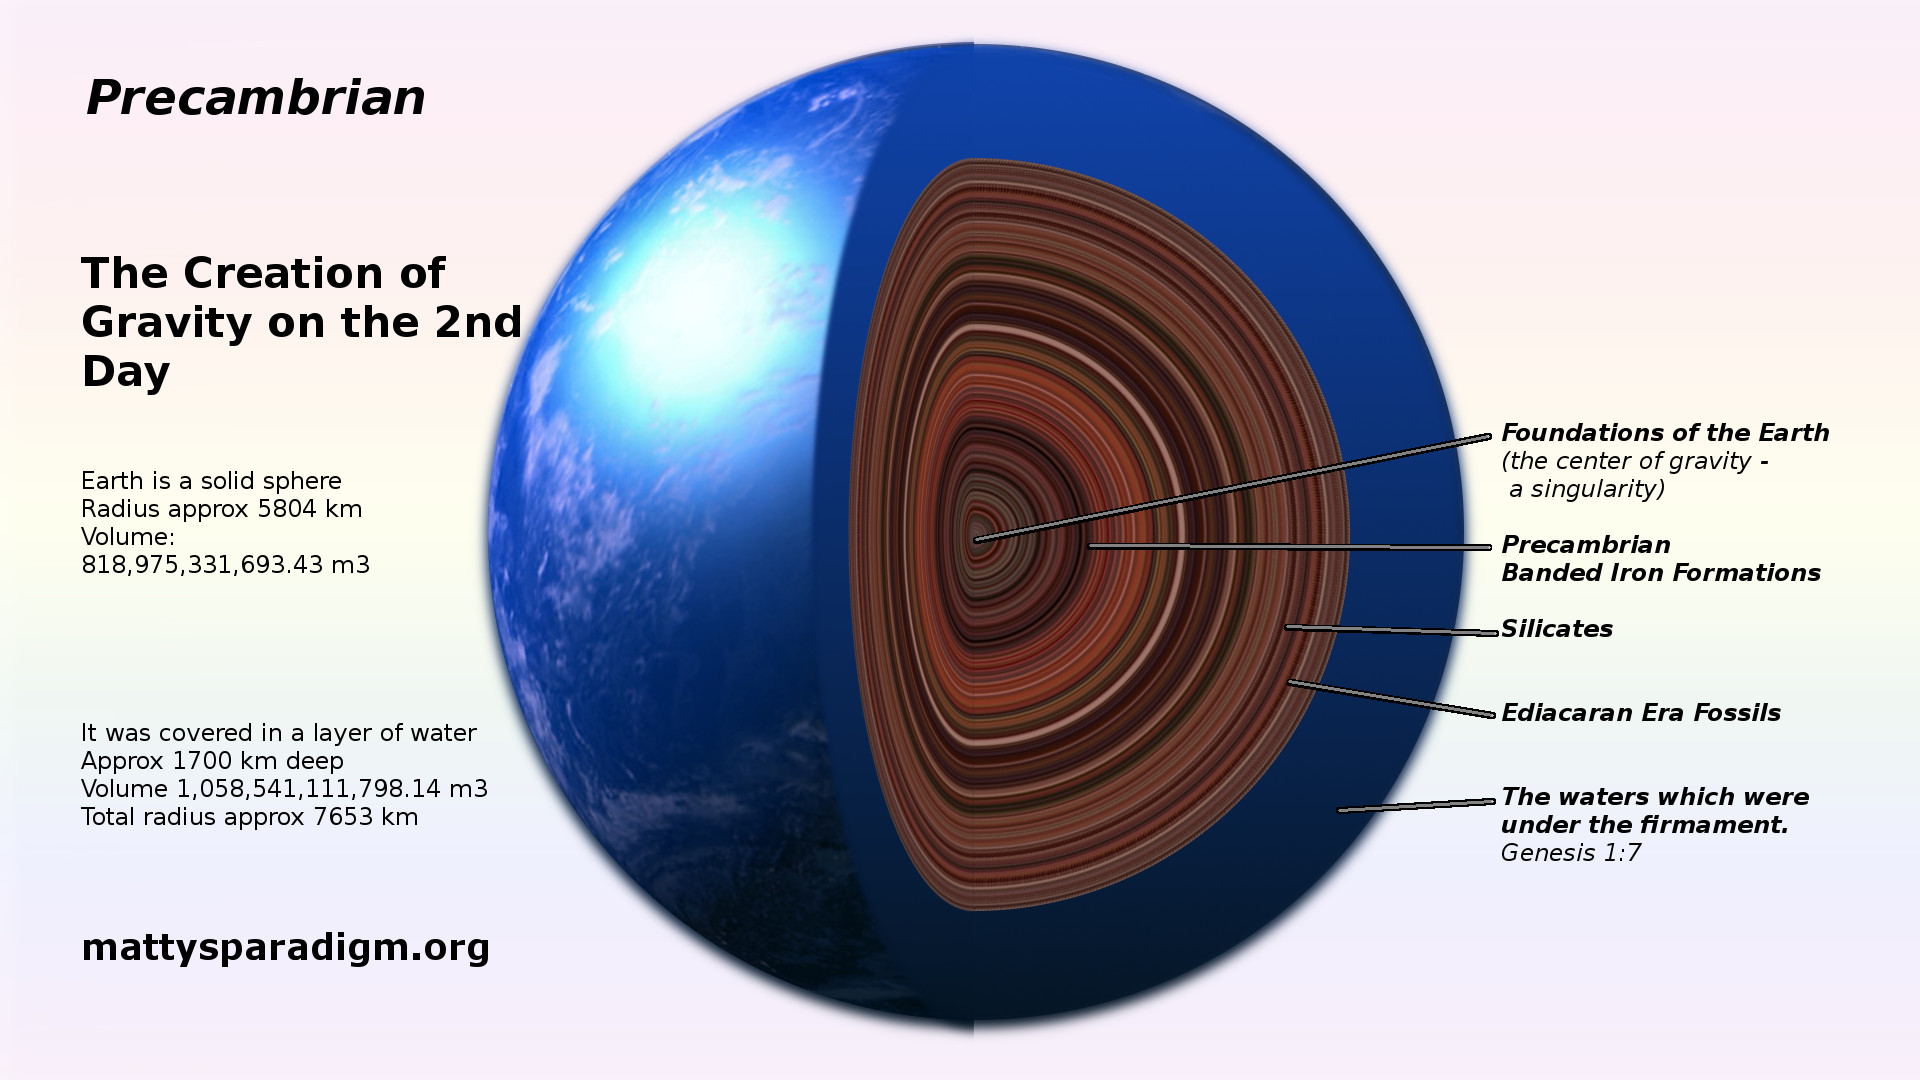 Planet earth on the second day as concentric layers of sediment around a gravitational singularity